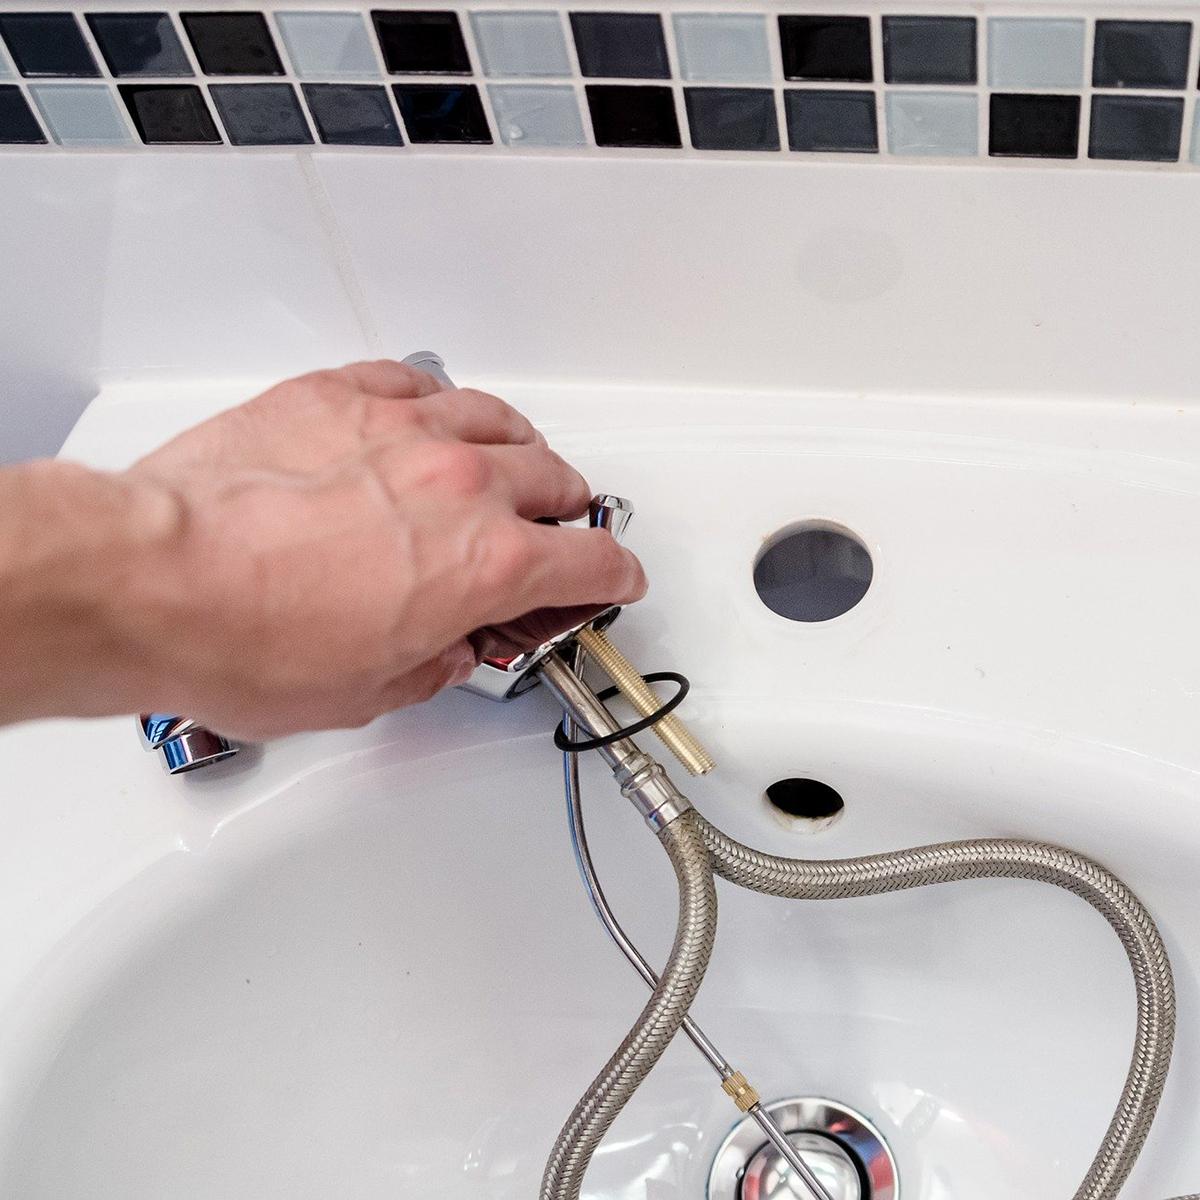 6 Things to Consider When Hiring a Bathroom Fitter